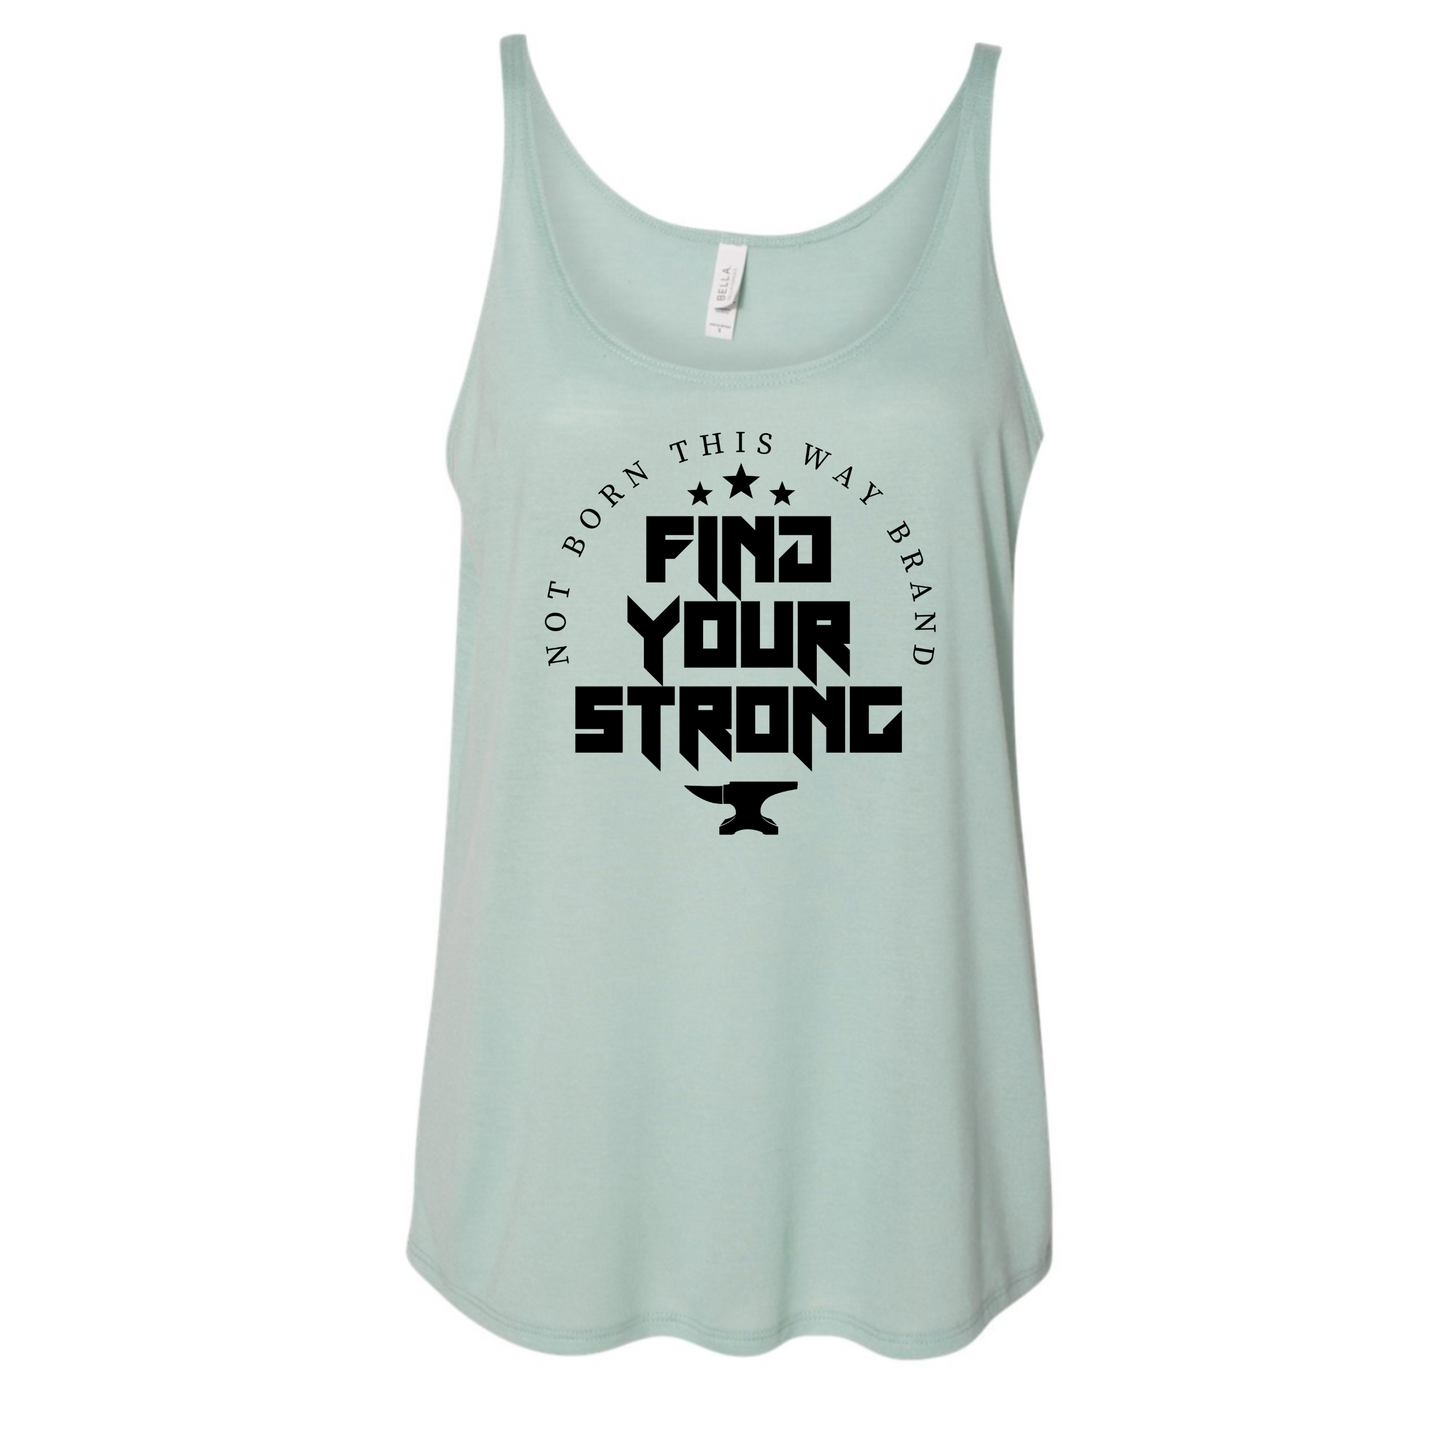 FIND YOUR STRONG - Women's Slouchy tank